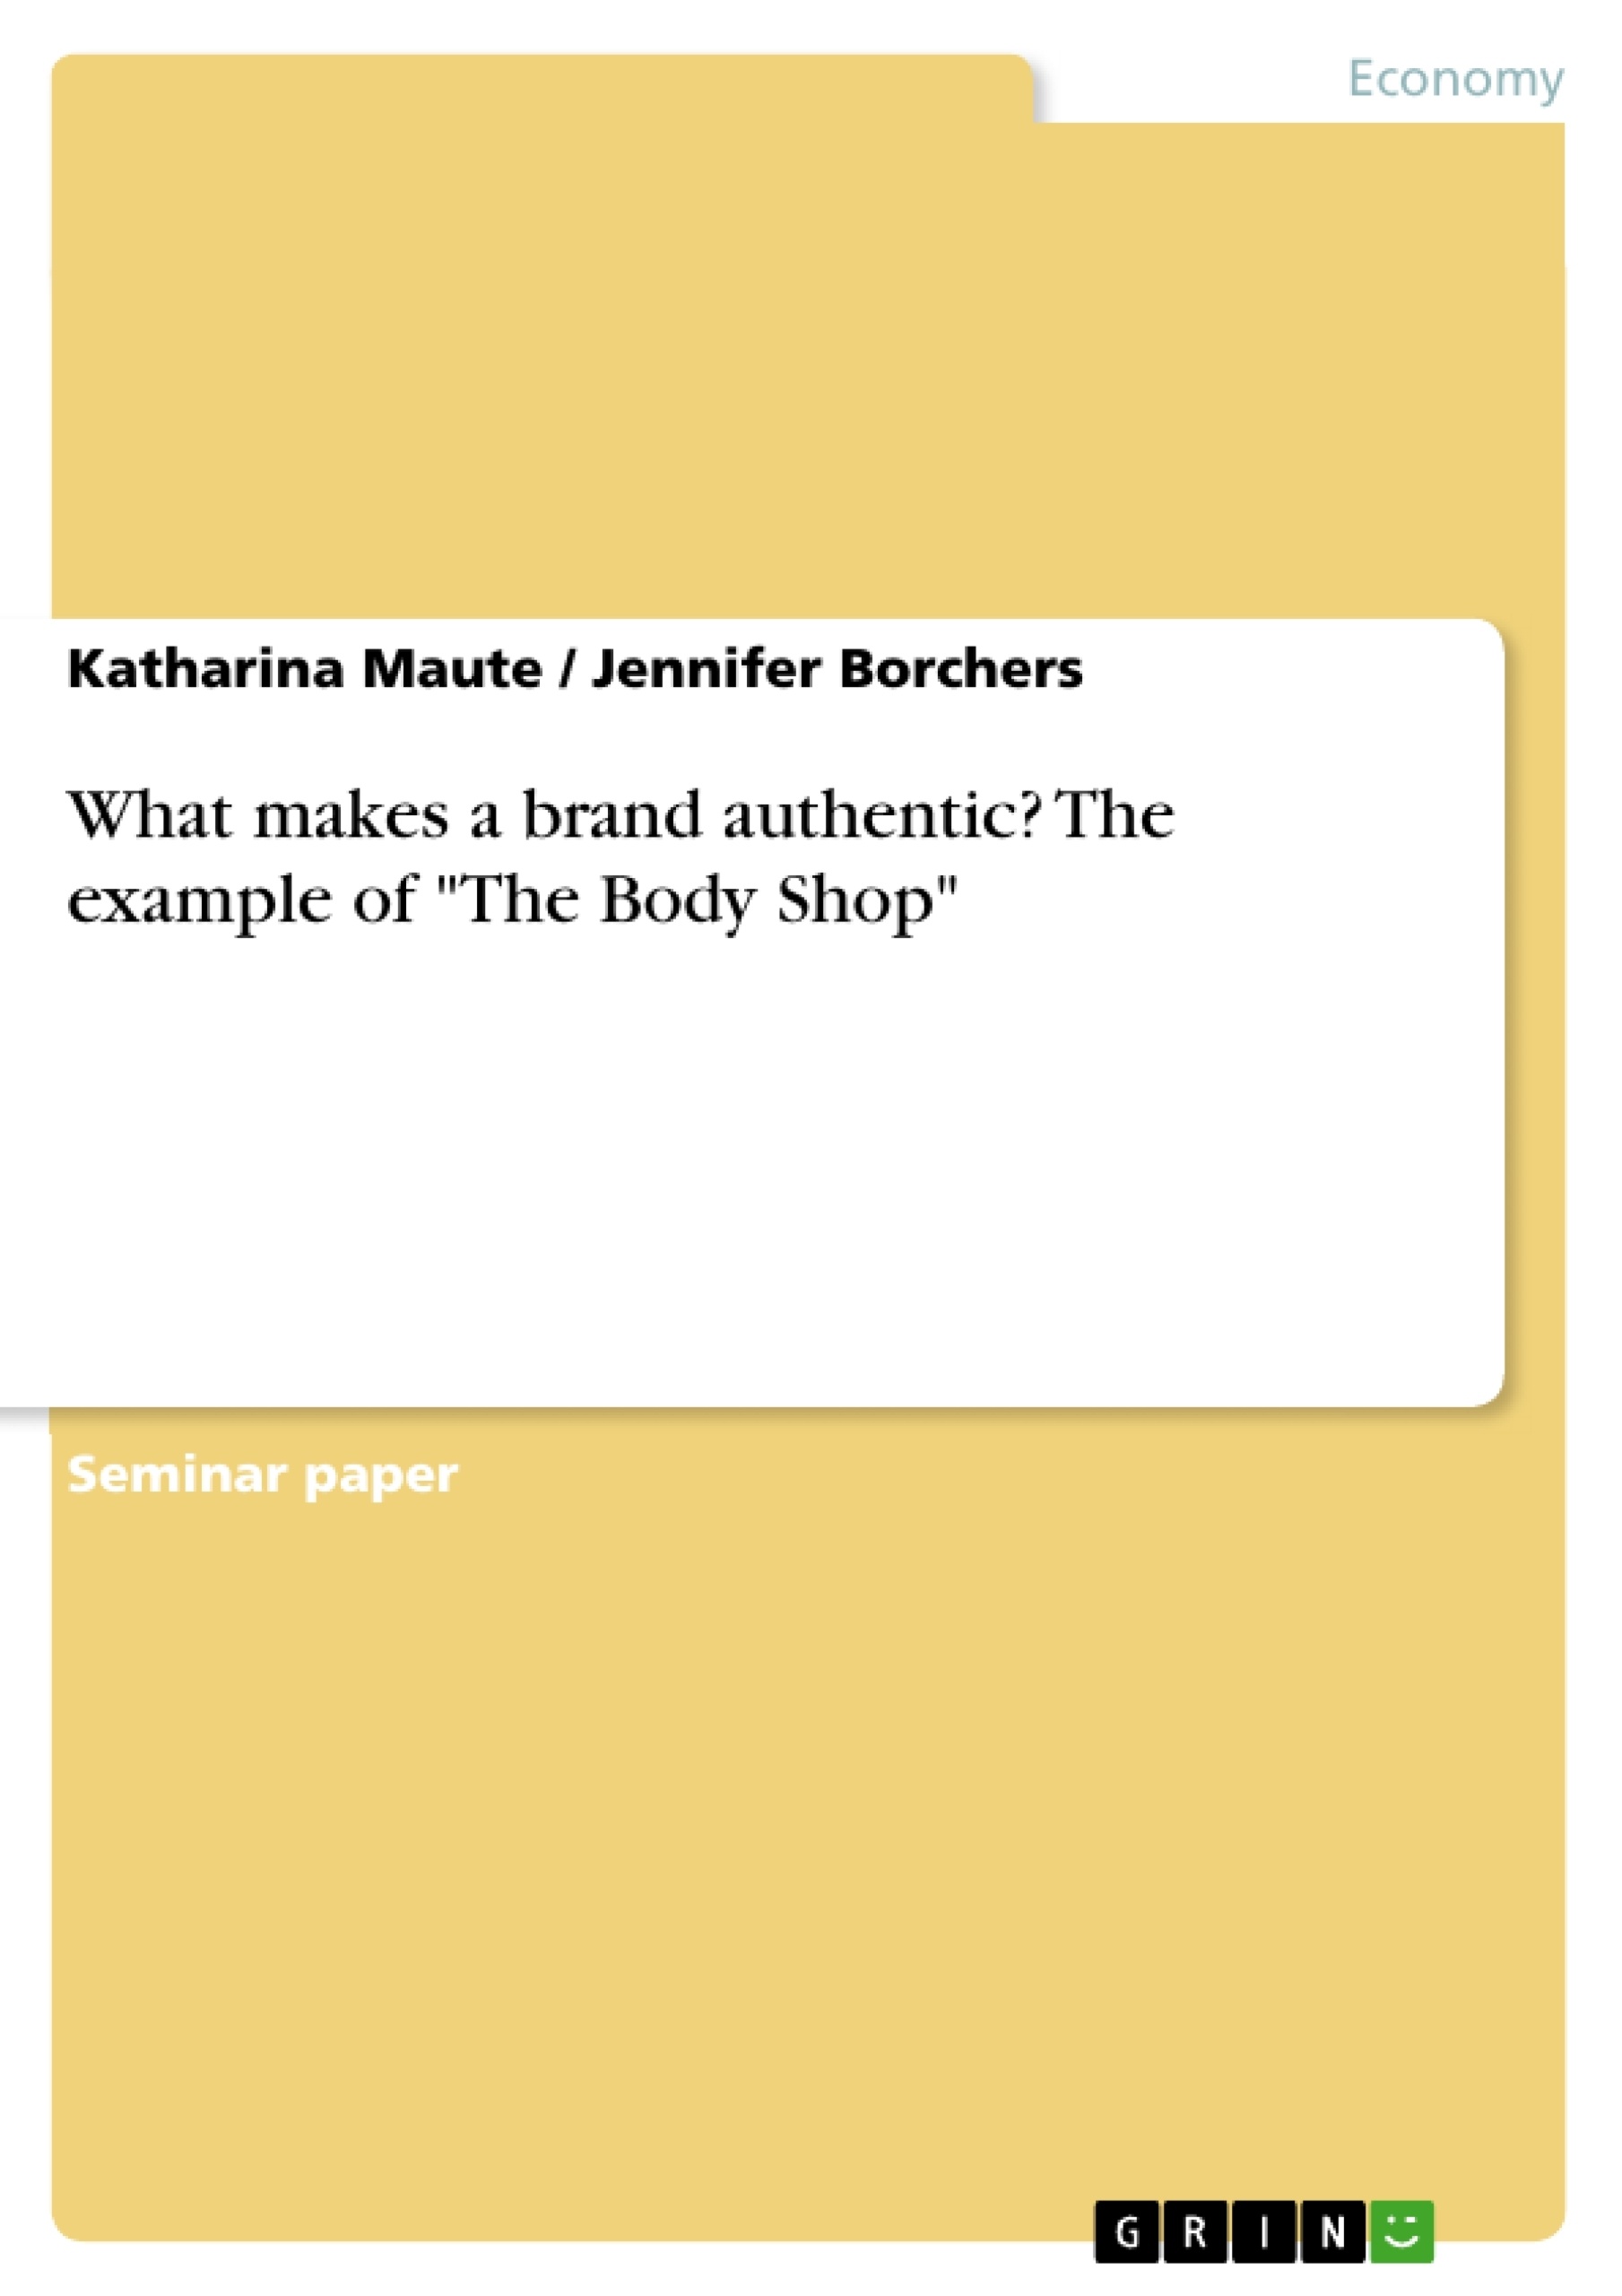 Title: What makes a brand authentic? The example of "The Body Shop"